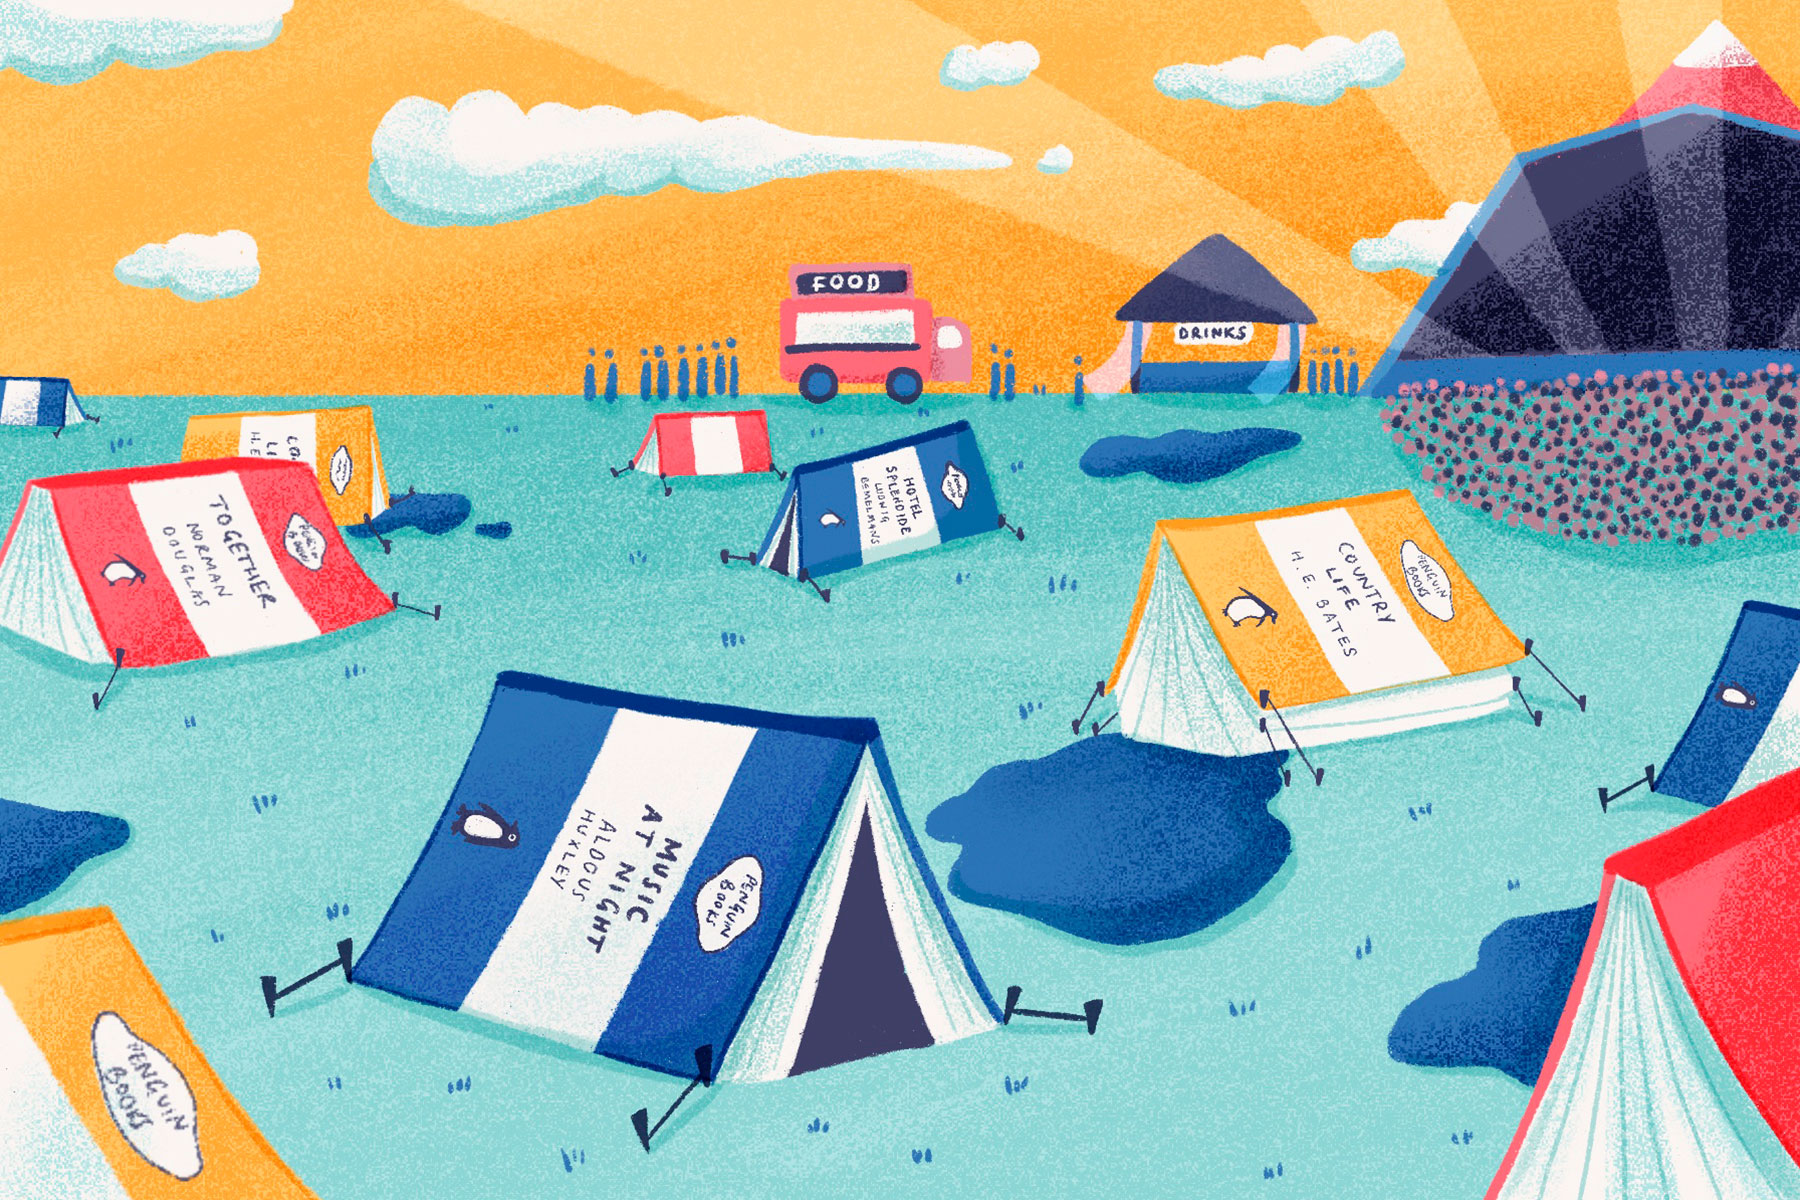 From Malcolm Lowry to Joseph O'Connor, Zadie Smith to Peppa Pig, lots of authors have chosen festivals in which to set memorable scenes.